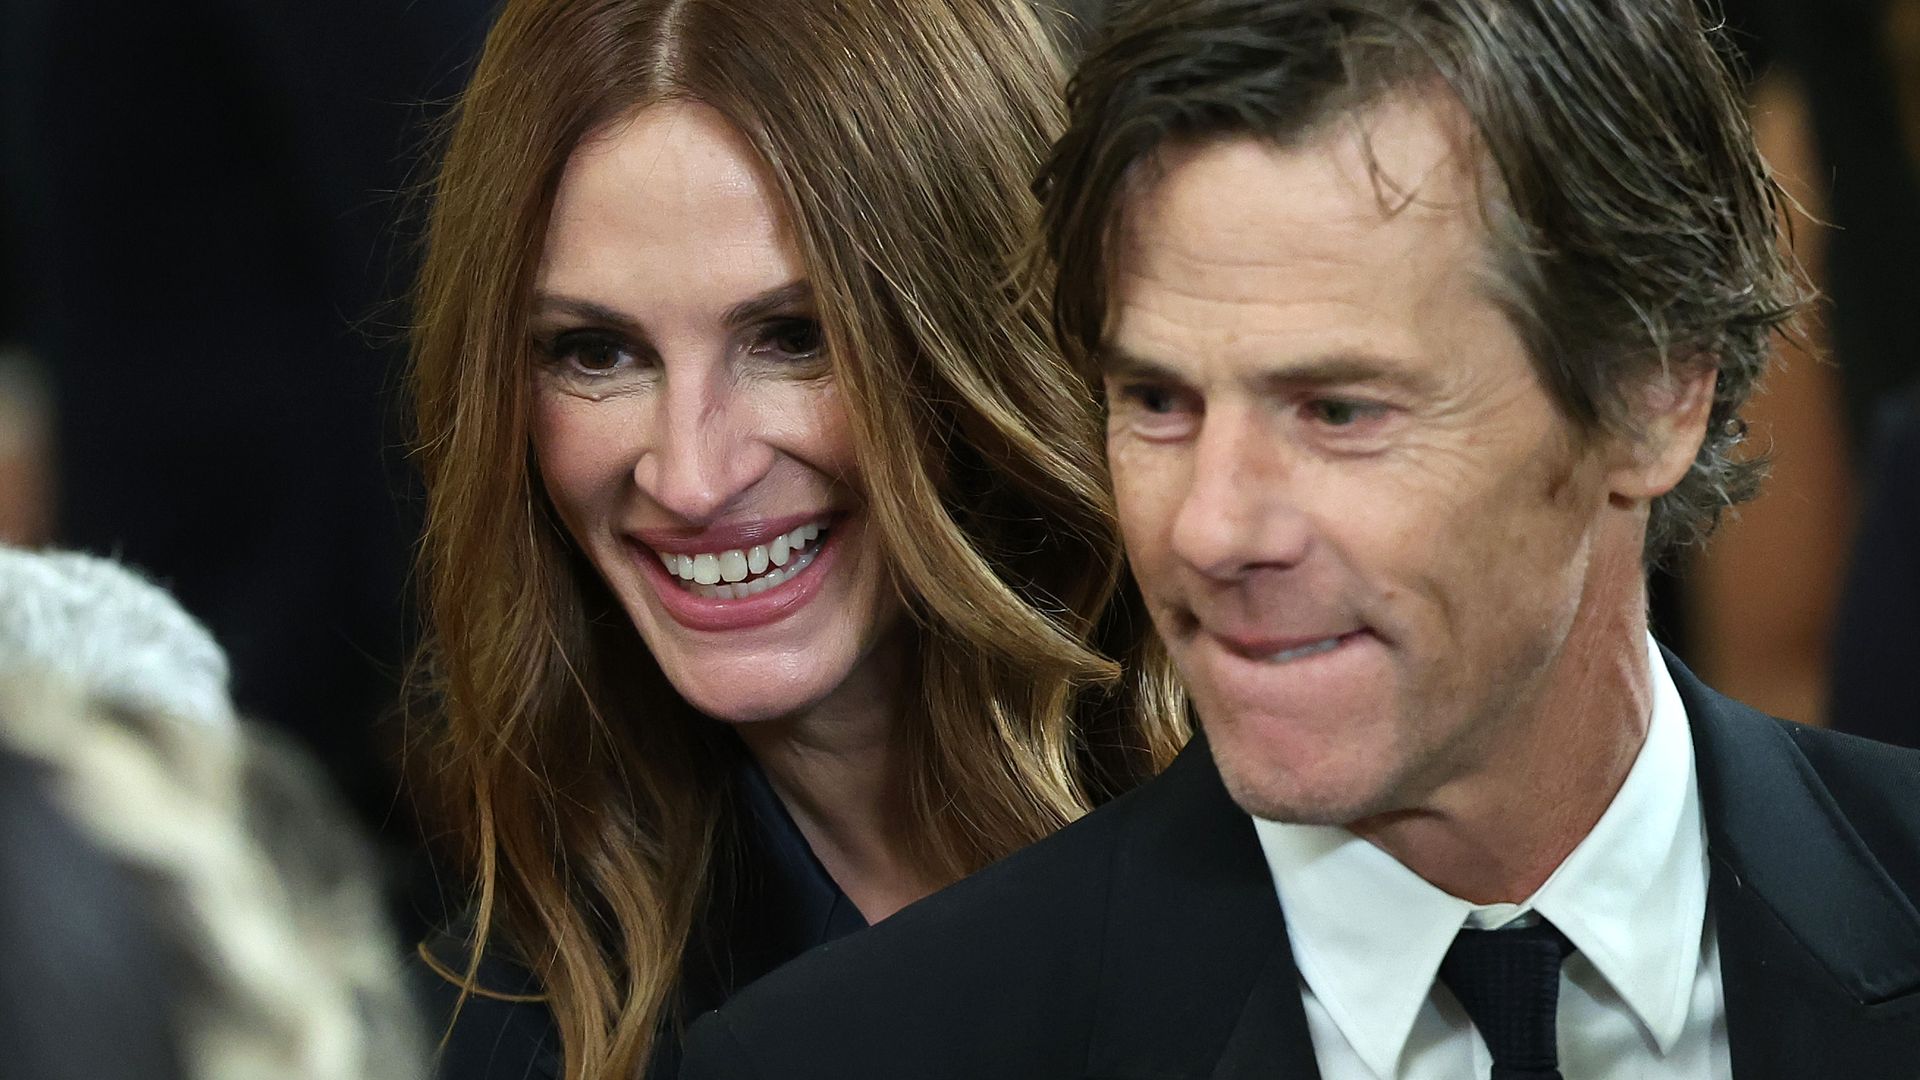 Julia Roberts breaks cover following viral video as she kisses husband Danny Moder in new photo